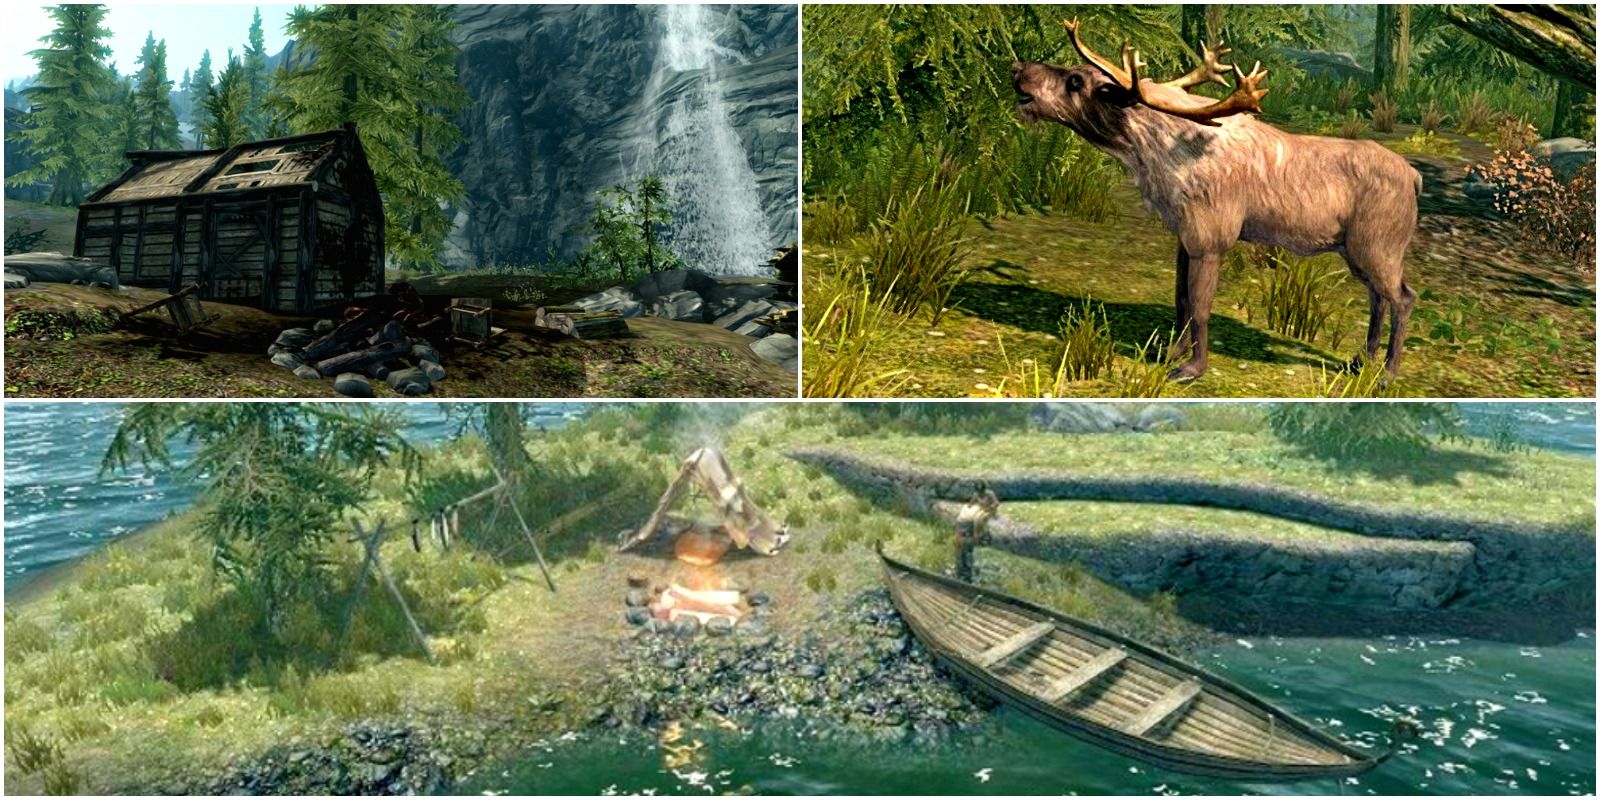 top right: an elk. bottom: camp on an island. top left: burnt cabin by a waterfall.